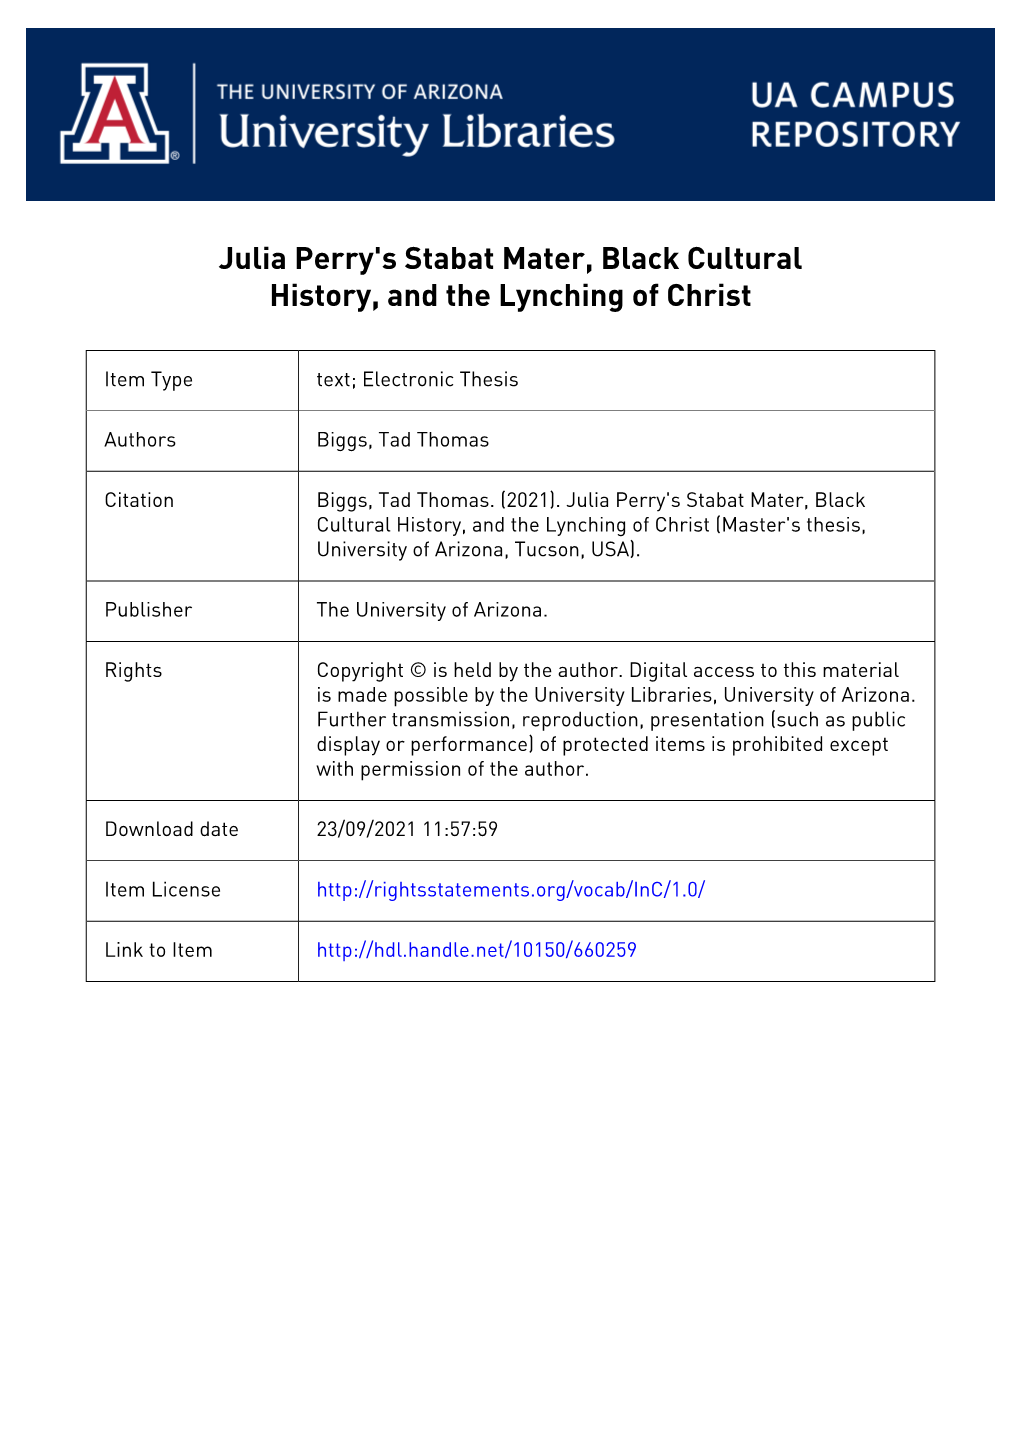 Julia Perry's Stabat Mater, Black Cultural History, and the Lynching of Christ